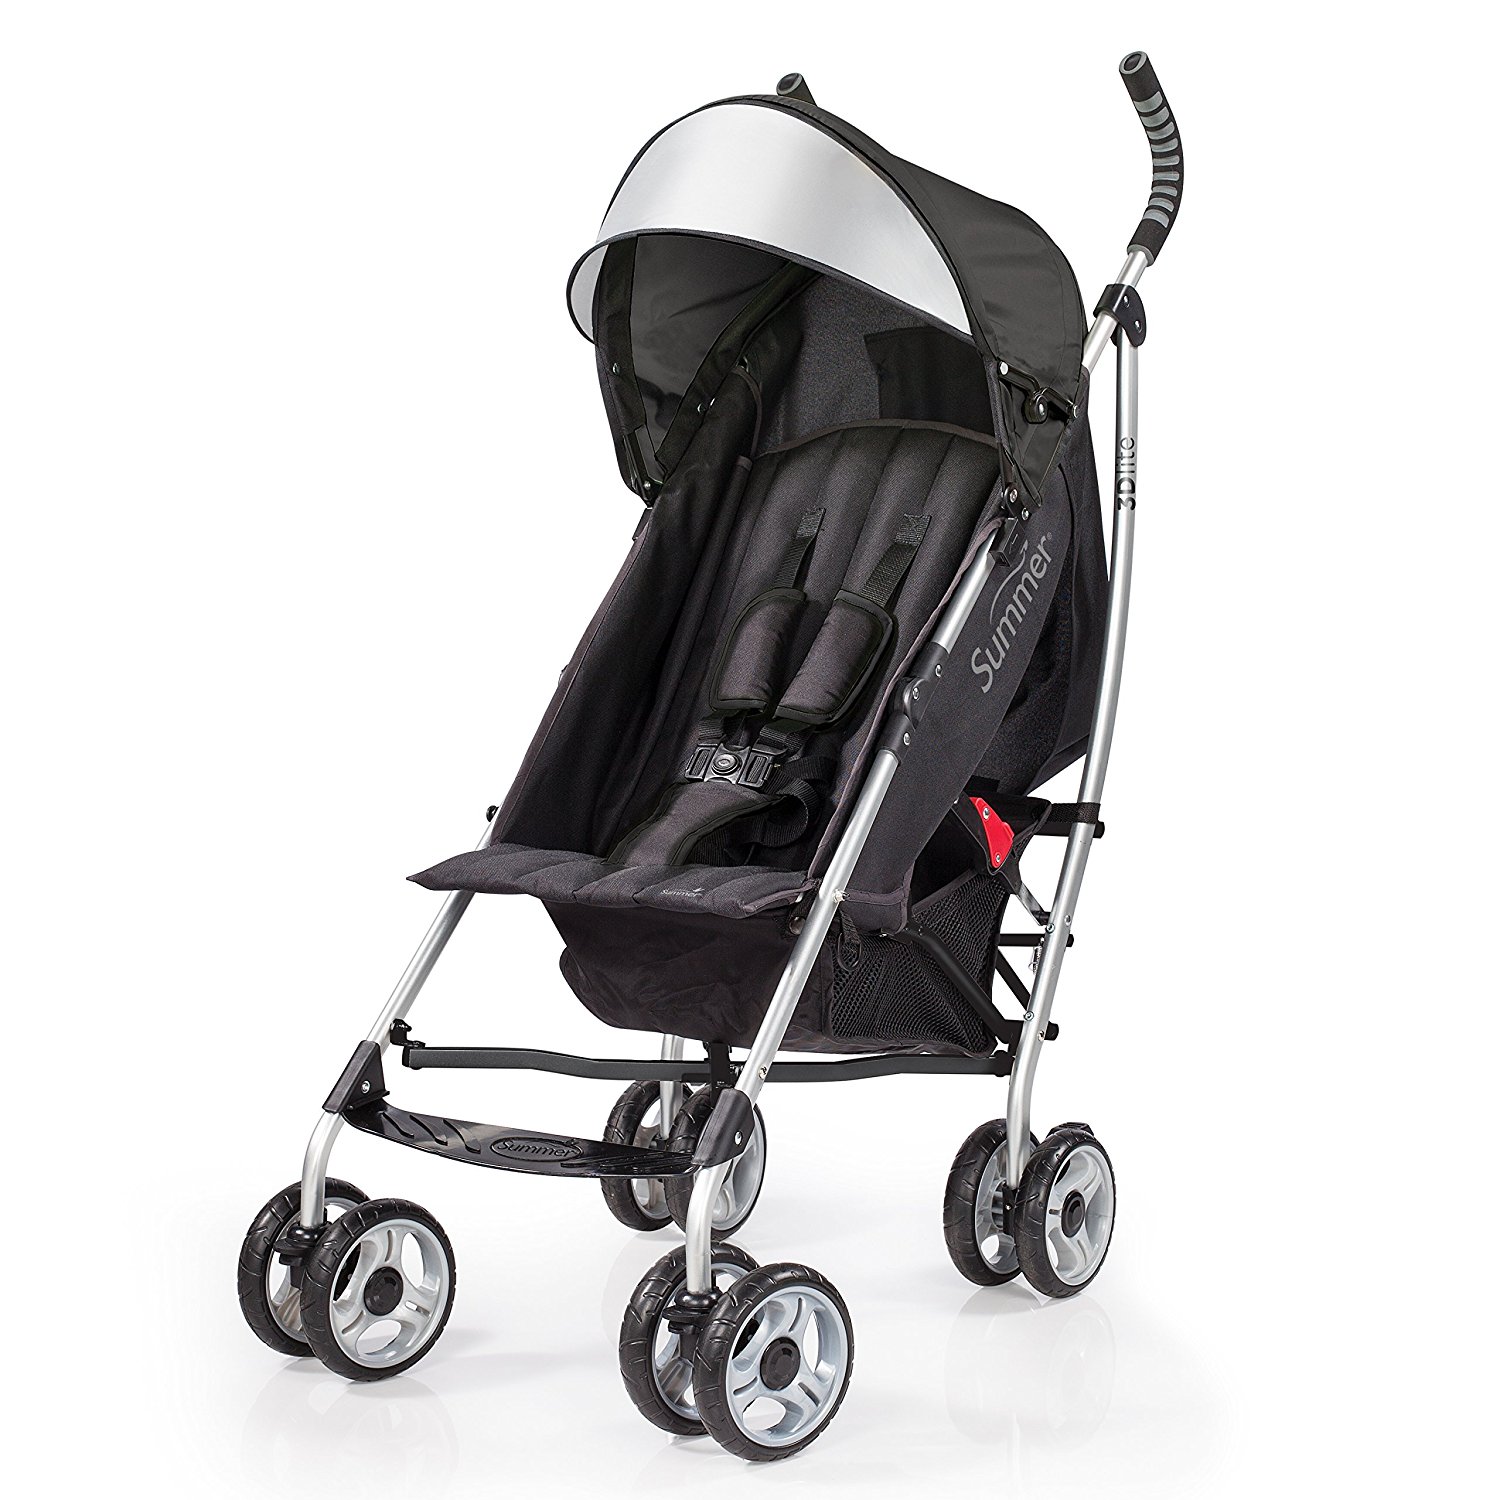 What to look for when buying a Stroller